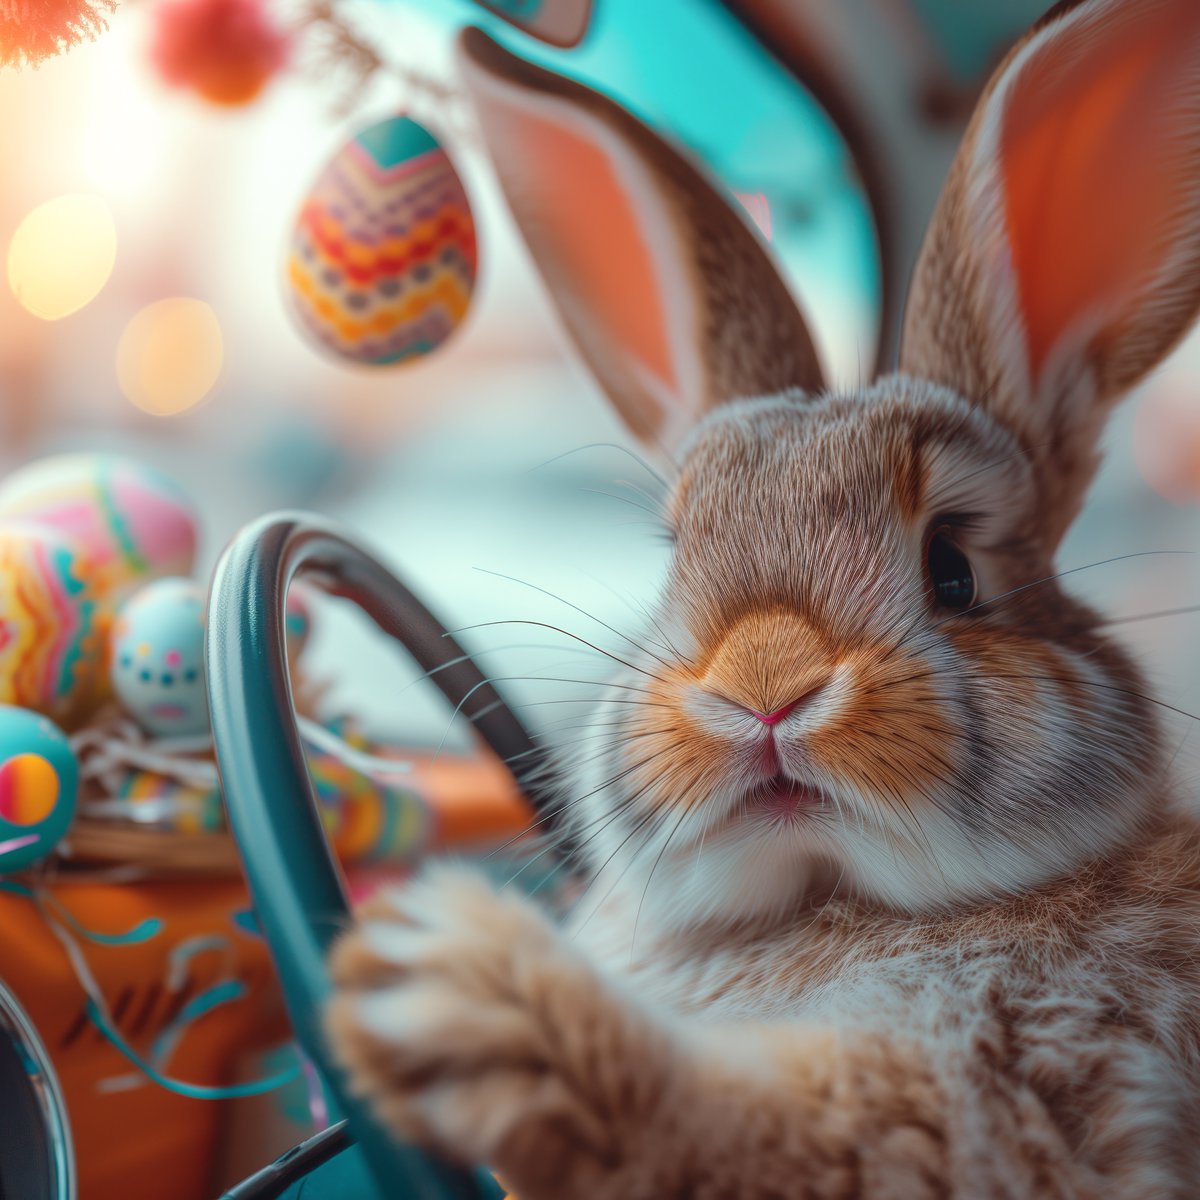 How could we not post this cutie 🐰 A very Happy Easter from team runyourfleet🐣🌺 May your weekend be full of adventure 🚙 Our offices will be closed from 5:30pm 28.03.24 and will re-open 9am 02.04.24 #happyeaster